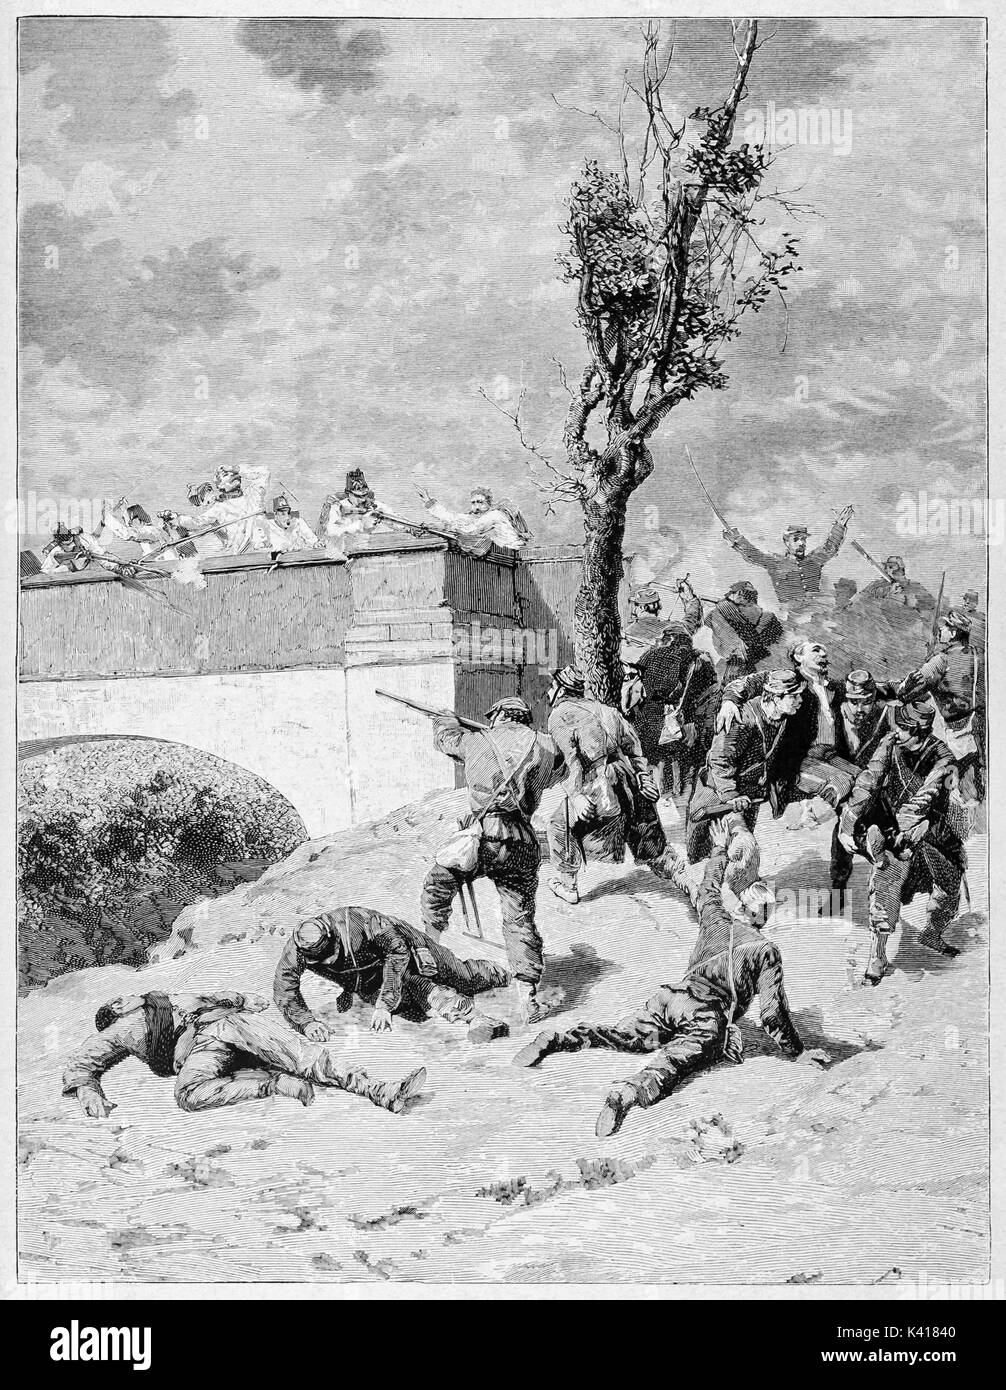 Ancient armys shooting each other close to a bridge where Narciso Bronzetti (1821 - 1859) will find the death. By E. Matania published on Garibaldi e i Suoi Tempi Milan Italy 1884 Stock Photo